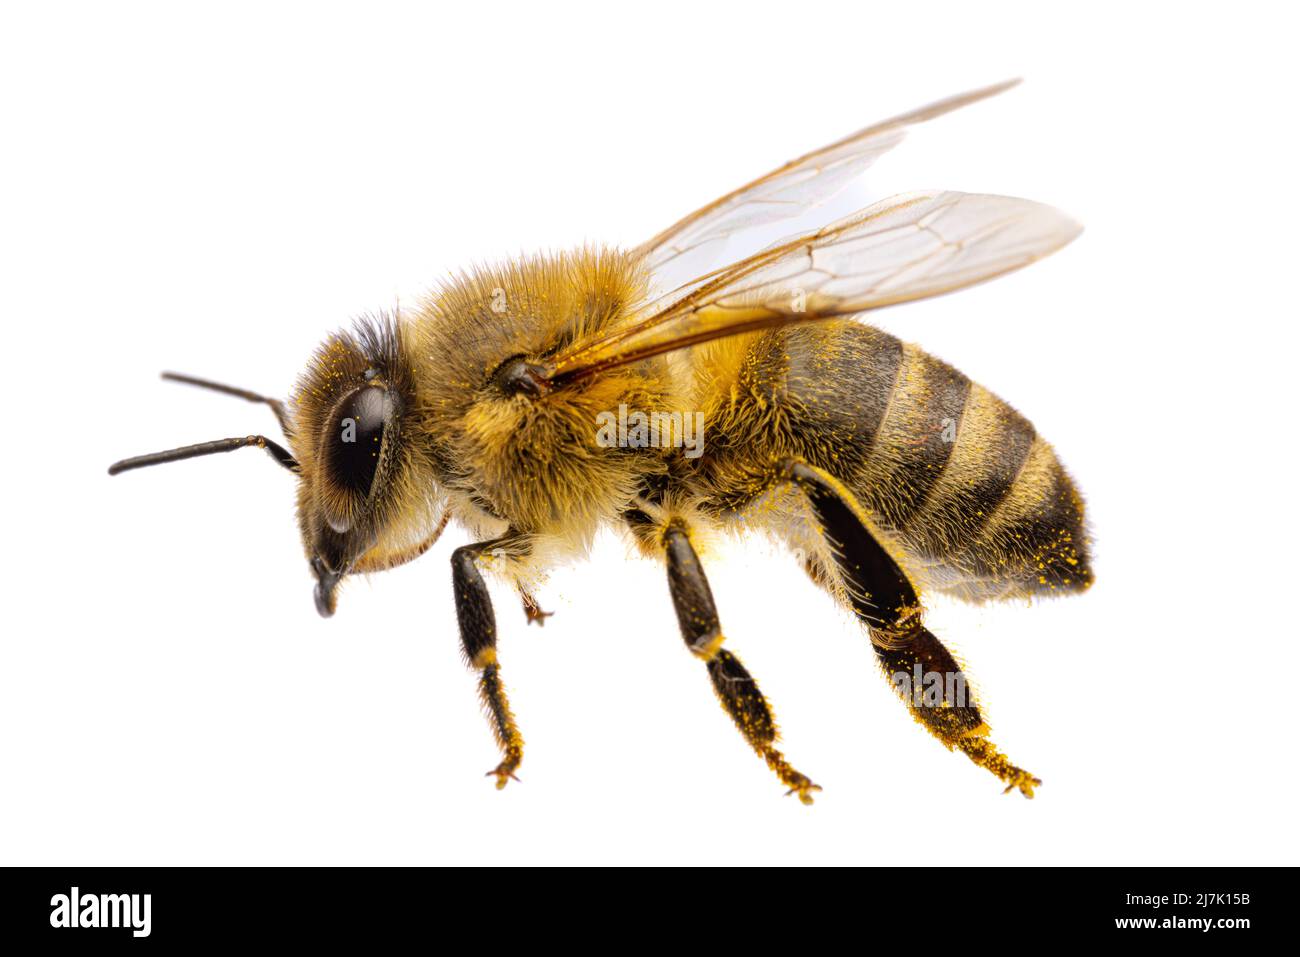 insects of europe - bees: side view macro of western honey bee ( Apis mellifera) isolated on white background with wings spreaded Stock Photo